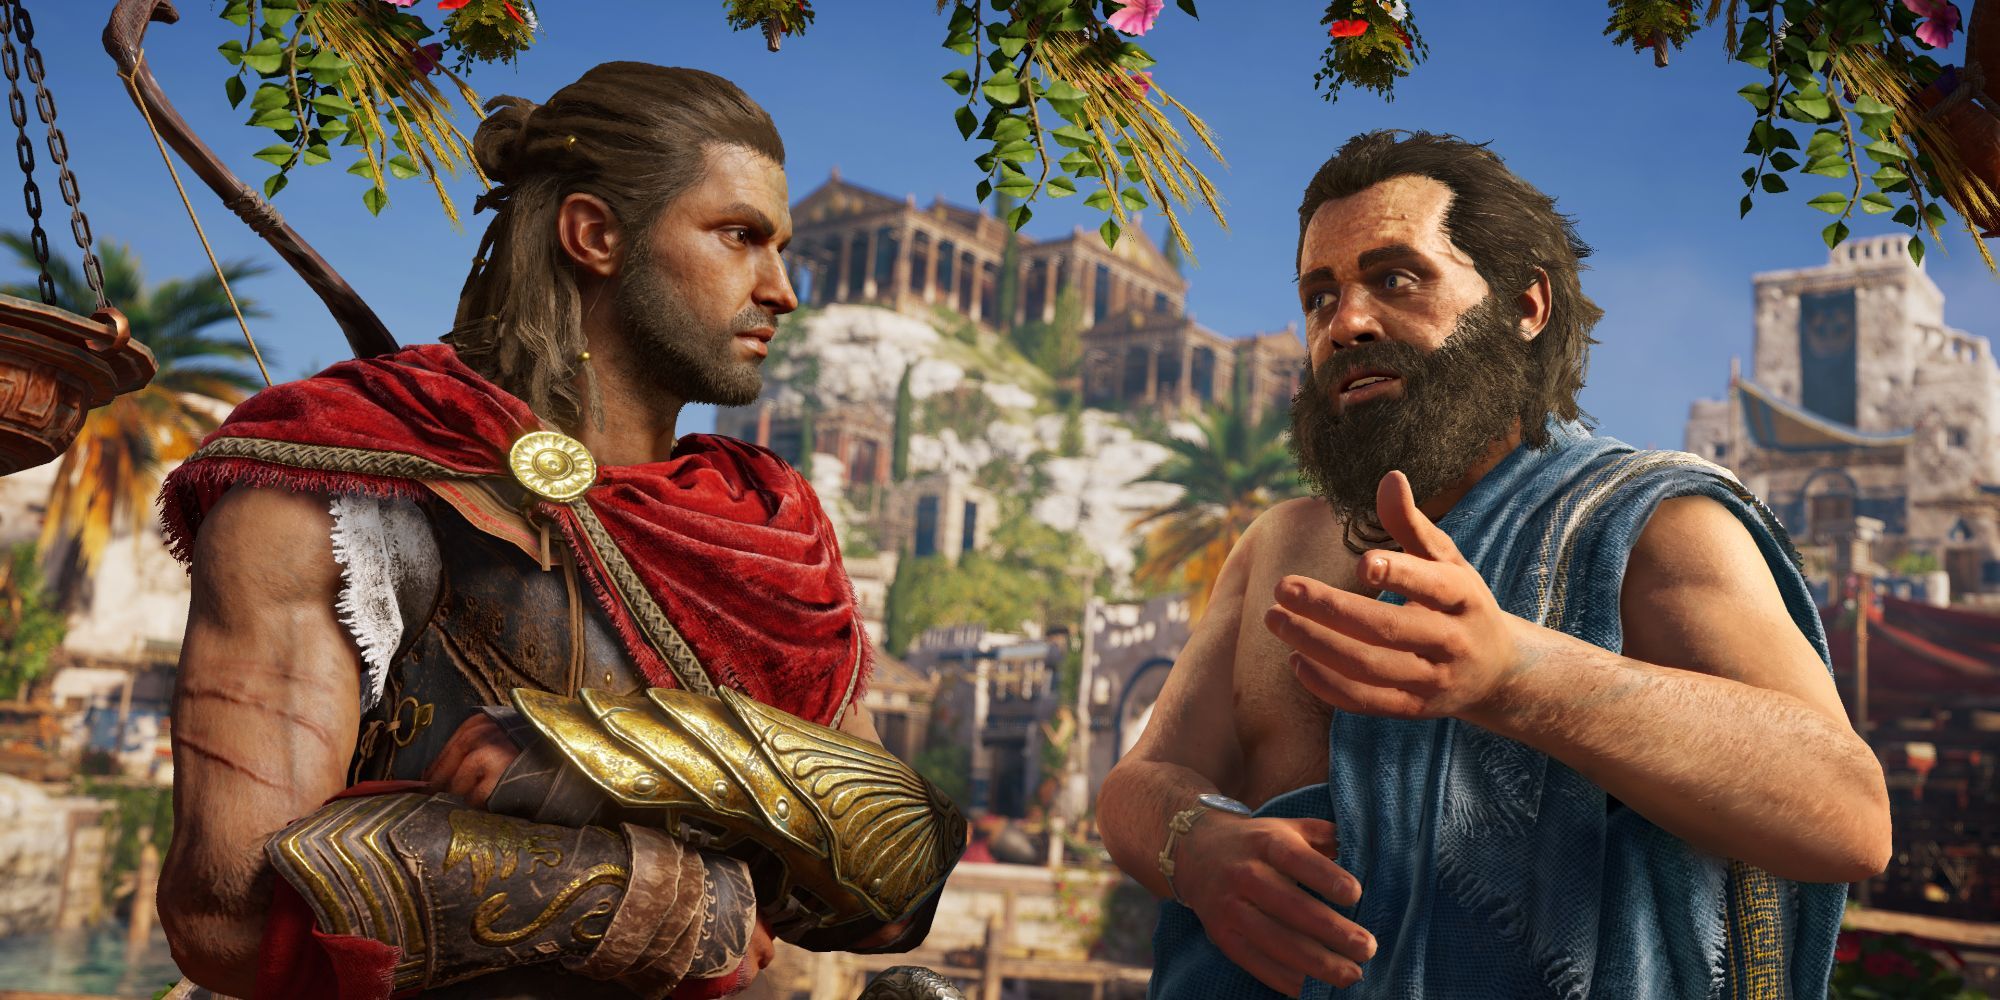 image of Socrates and Alexios talking in the video game Assassins Creed Odyssey